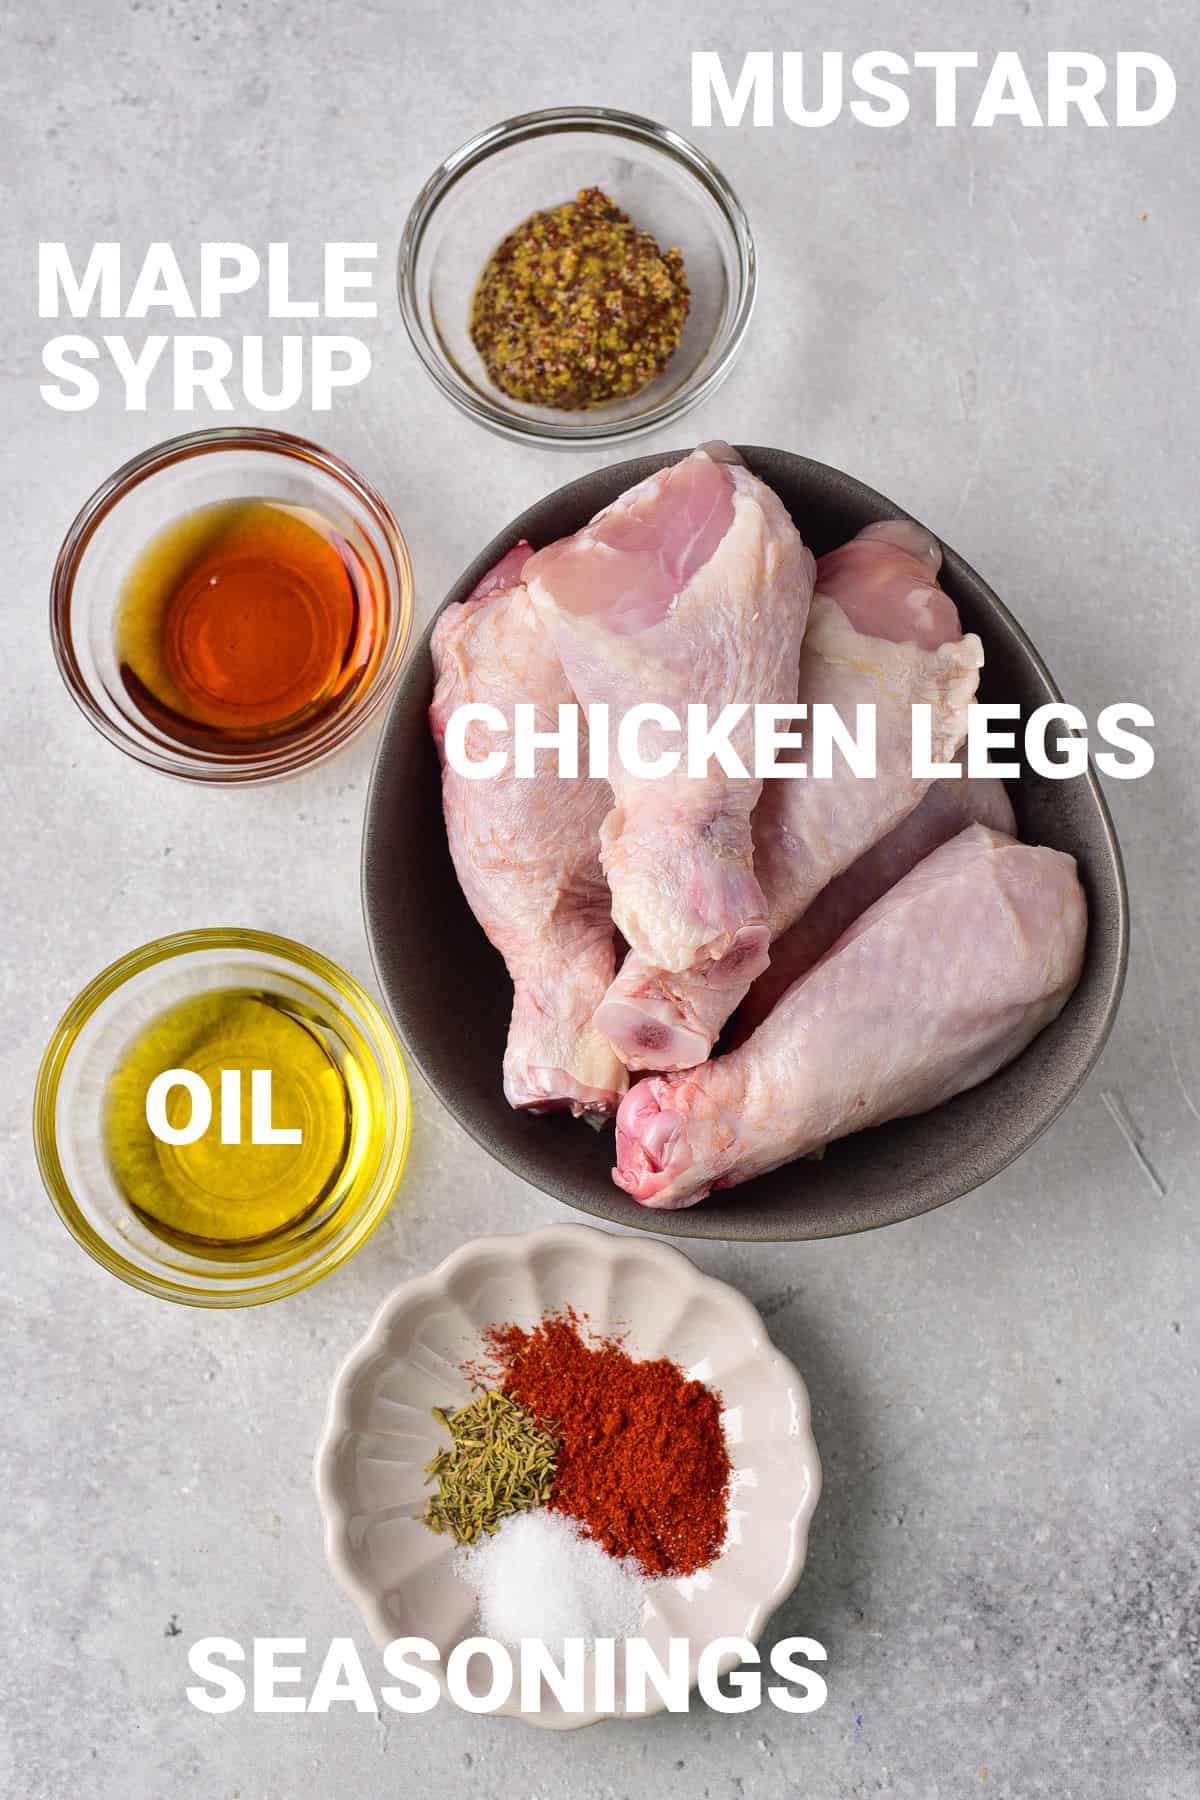 Chicken legs, mustard, maple syrup, oil and seasonings on a table.